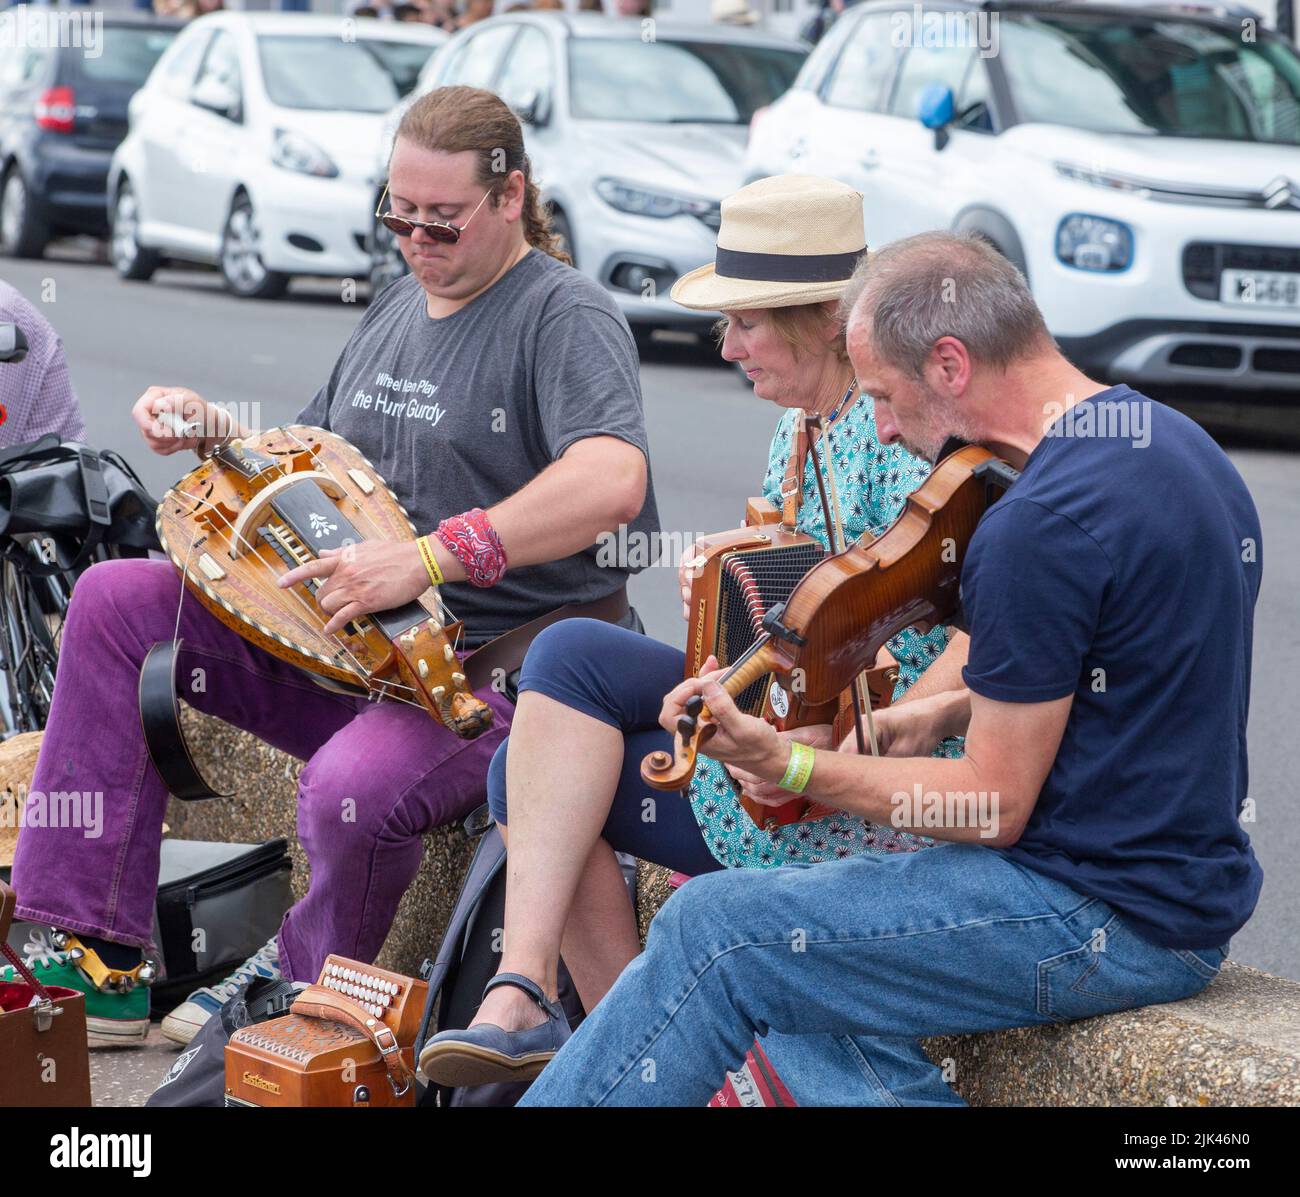 Sidmouth, 30th July 2022 Wheel Men in action, a hurdy gurdy man with band on the Esplanade at Sidmouth as the annual Folk Week Festival gets underway. Tony Charnock/Alamy Live News Stock Photo